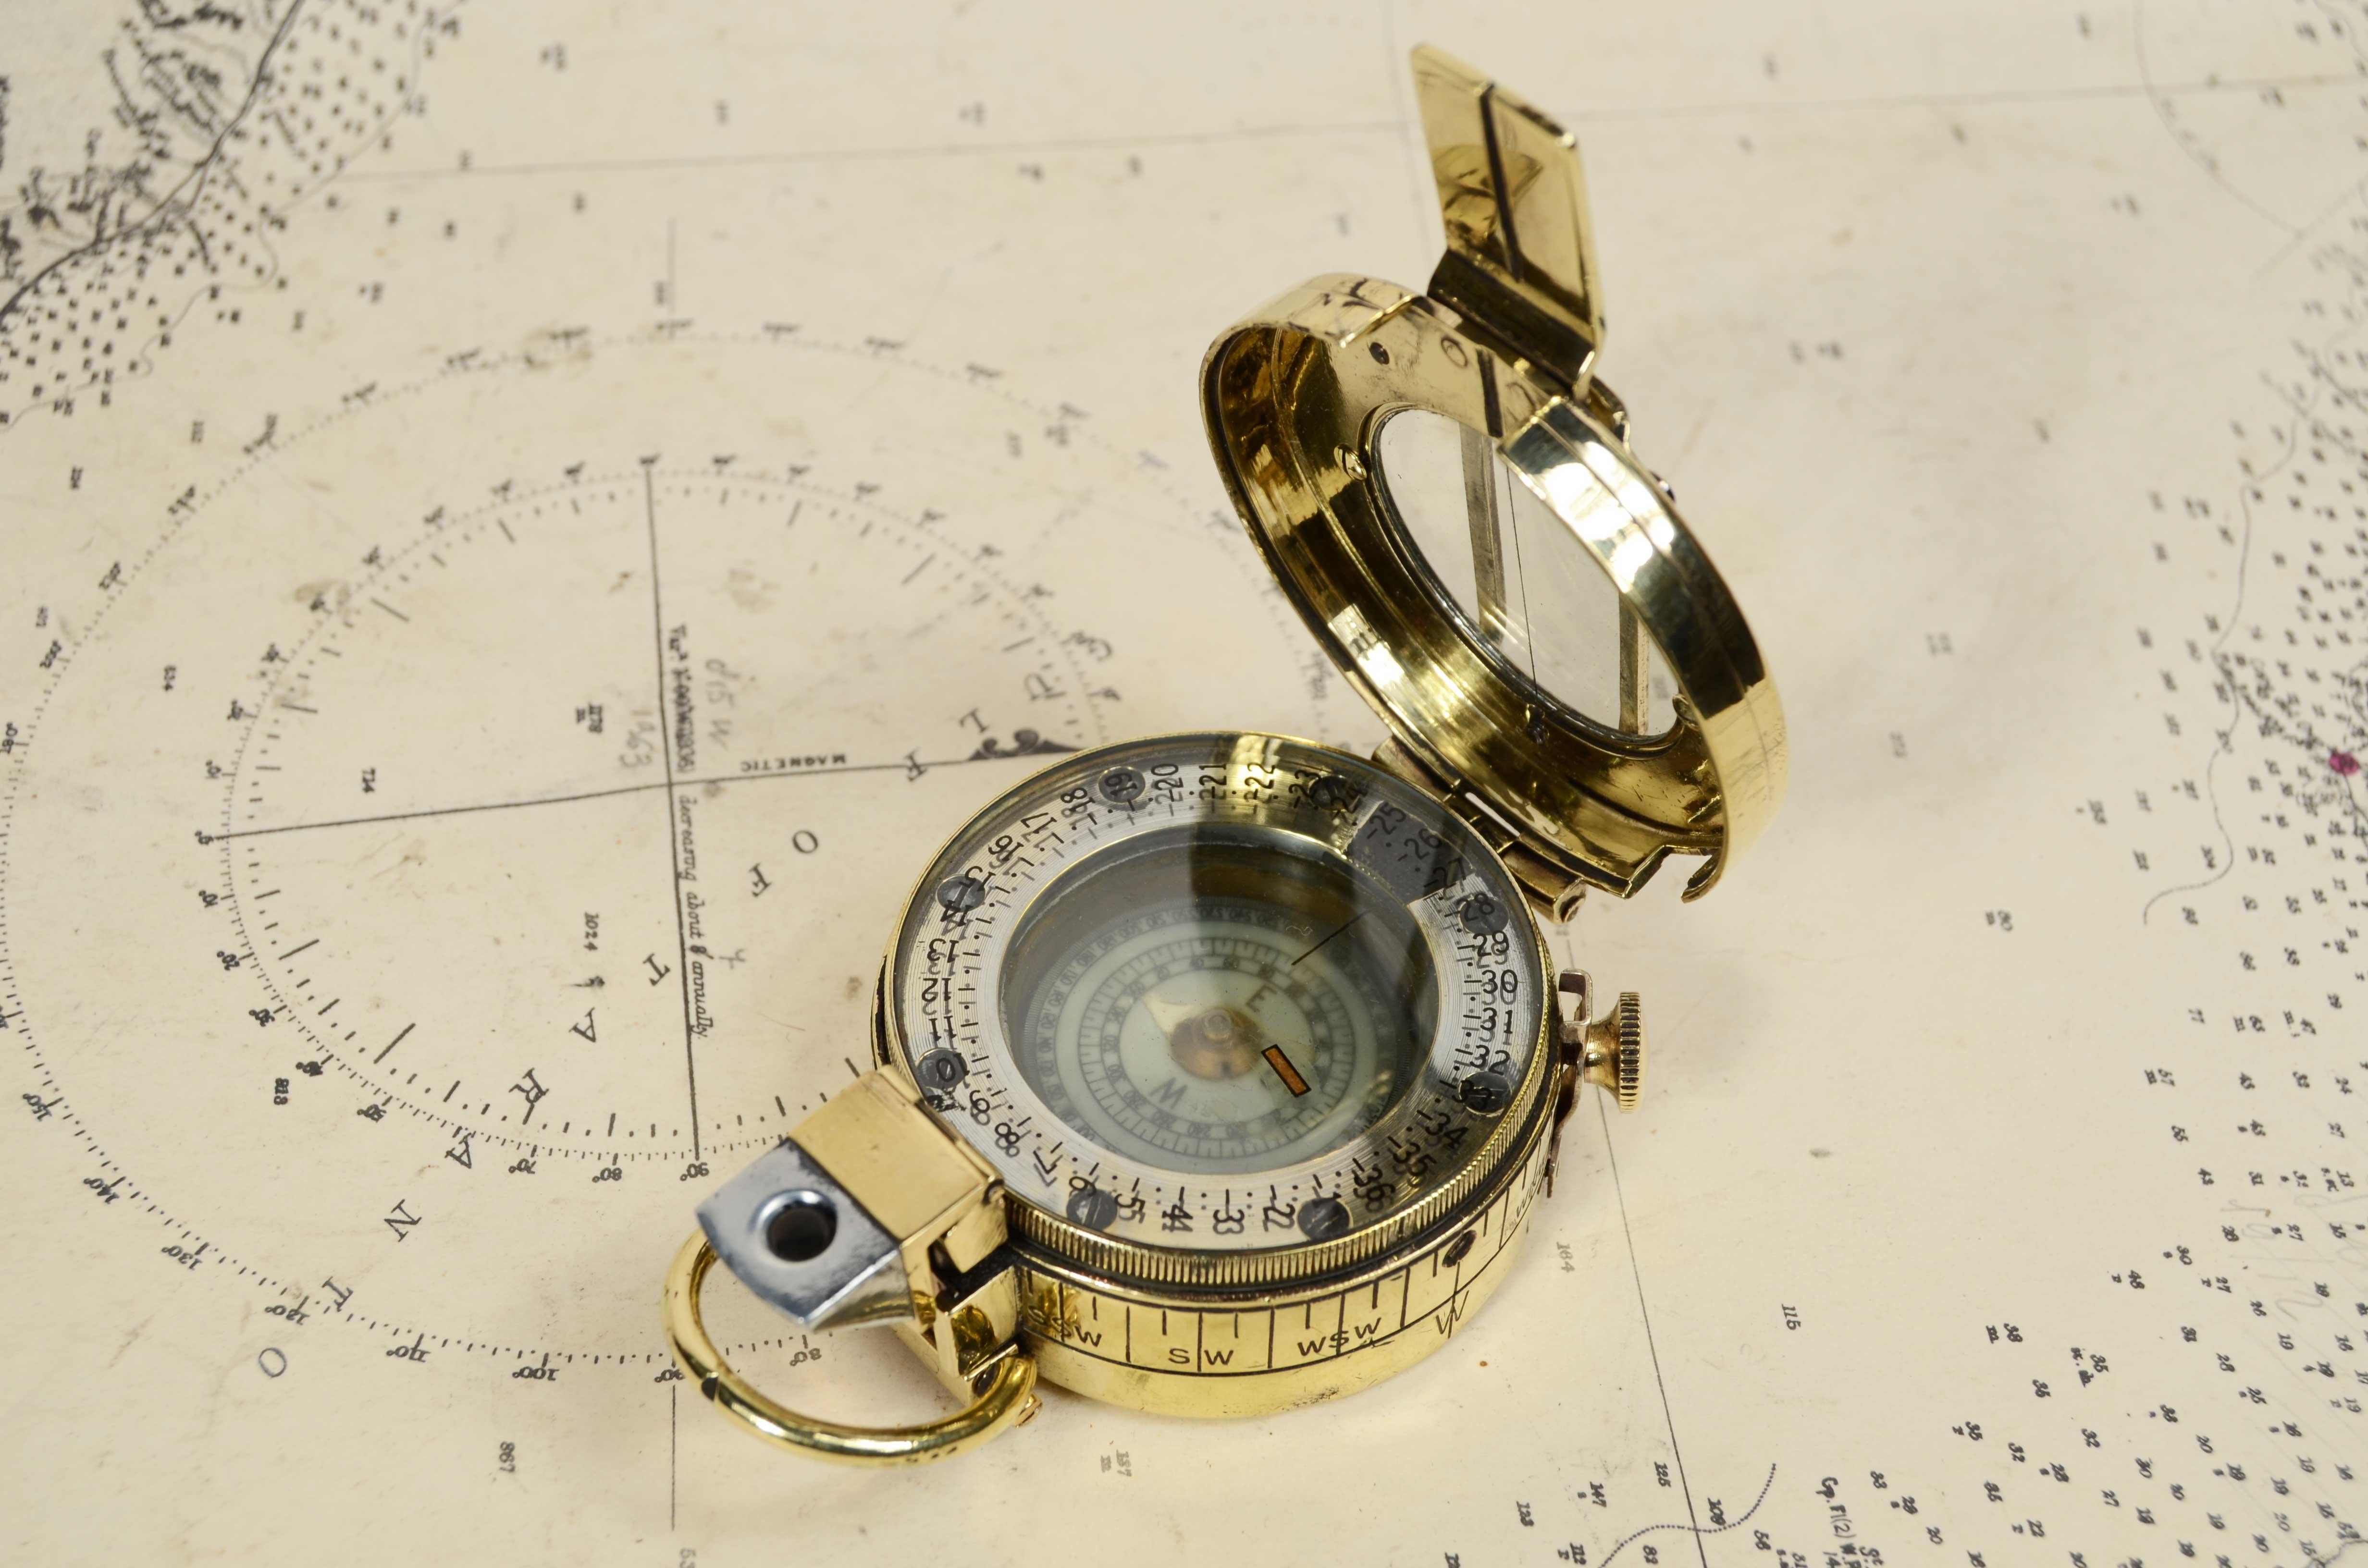 Prismatic compass  by detection signed T.G. Co Ltd London no. B 21681 1940 MK In Good Condition For Sale In Milan, IT